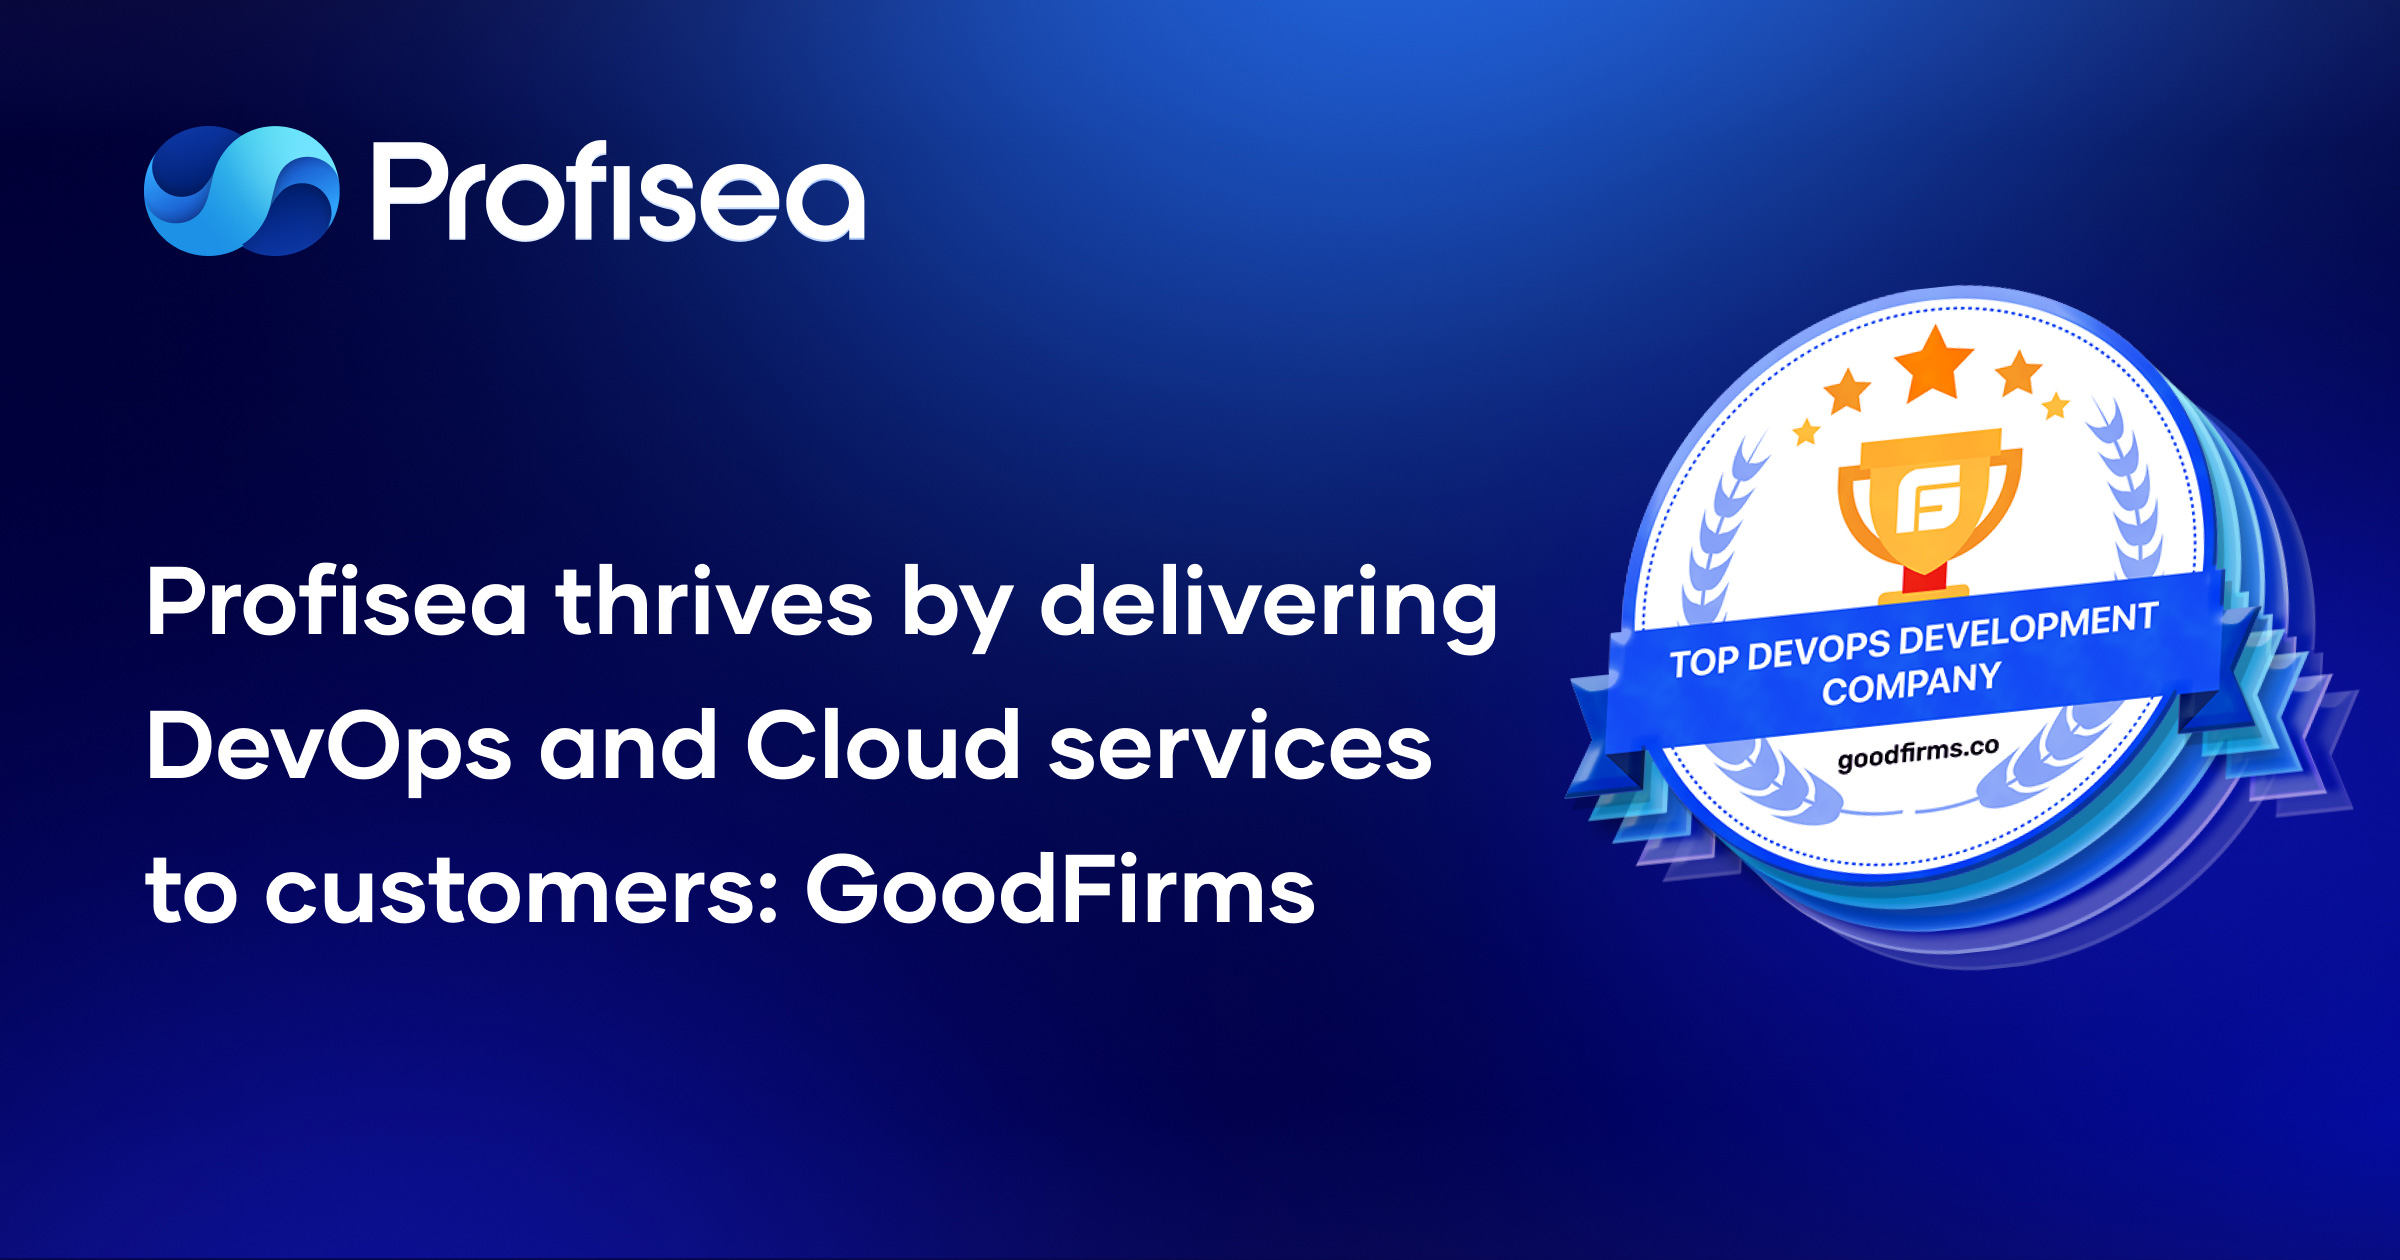 What our partners say – GoodFirms